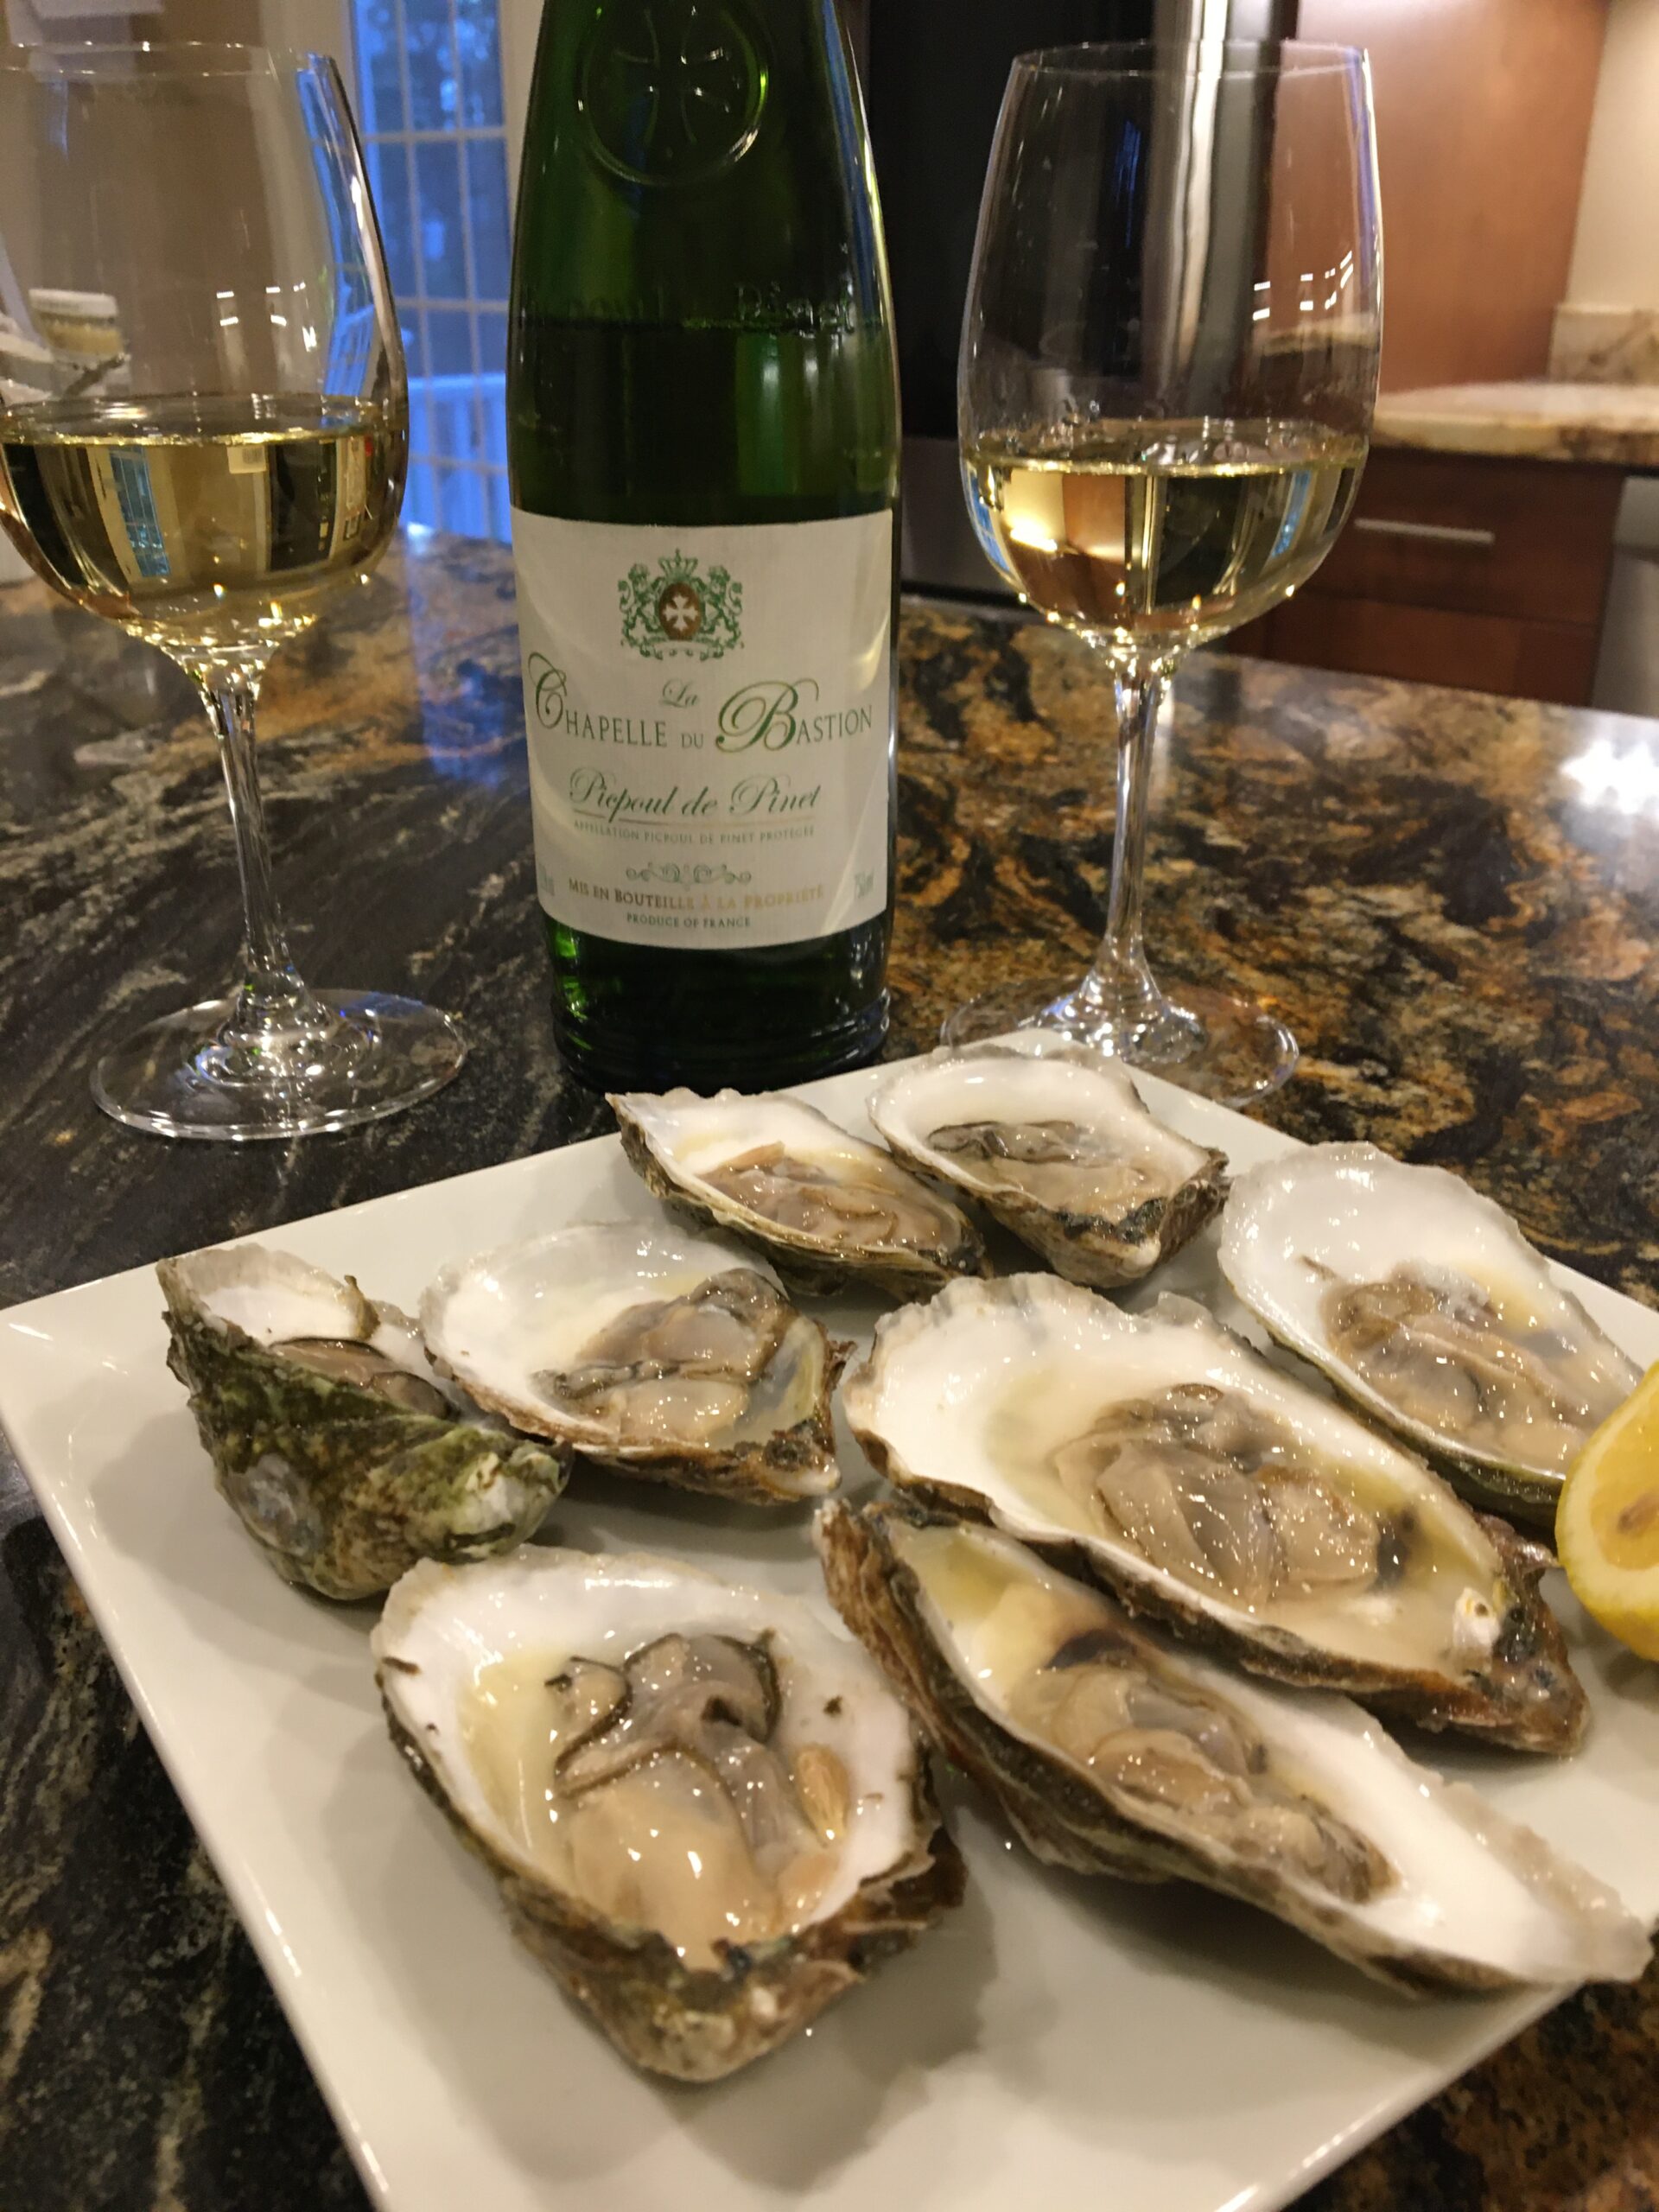 Picpoul southern france white wine